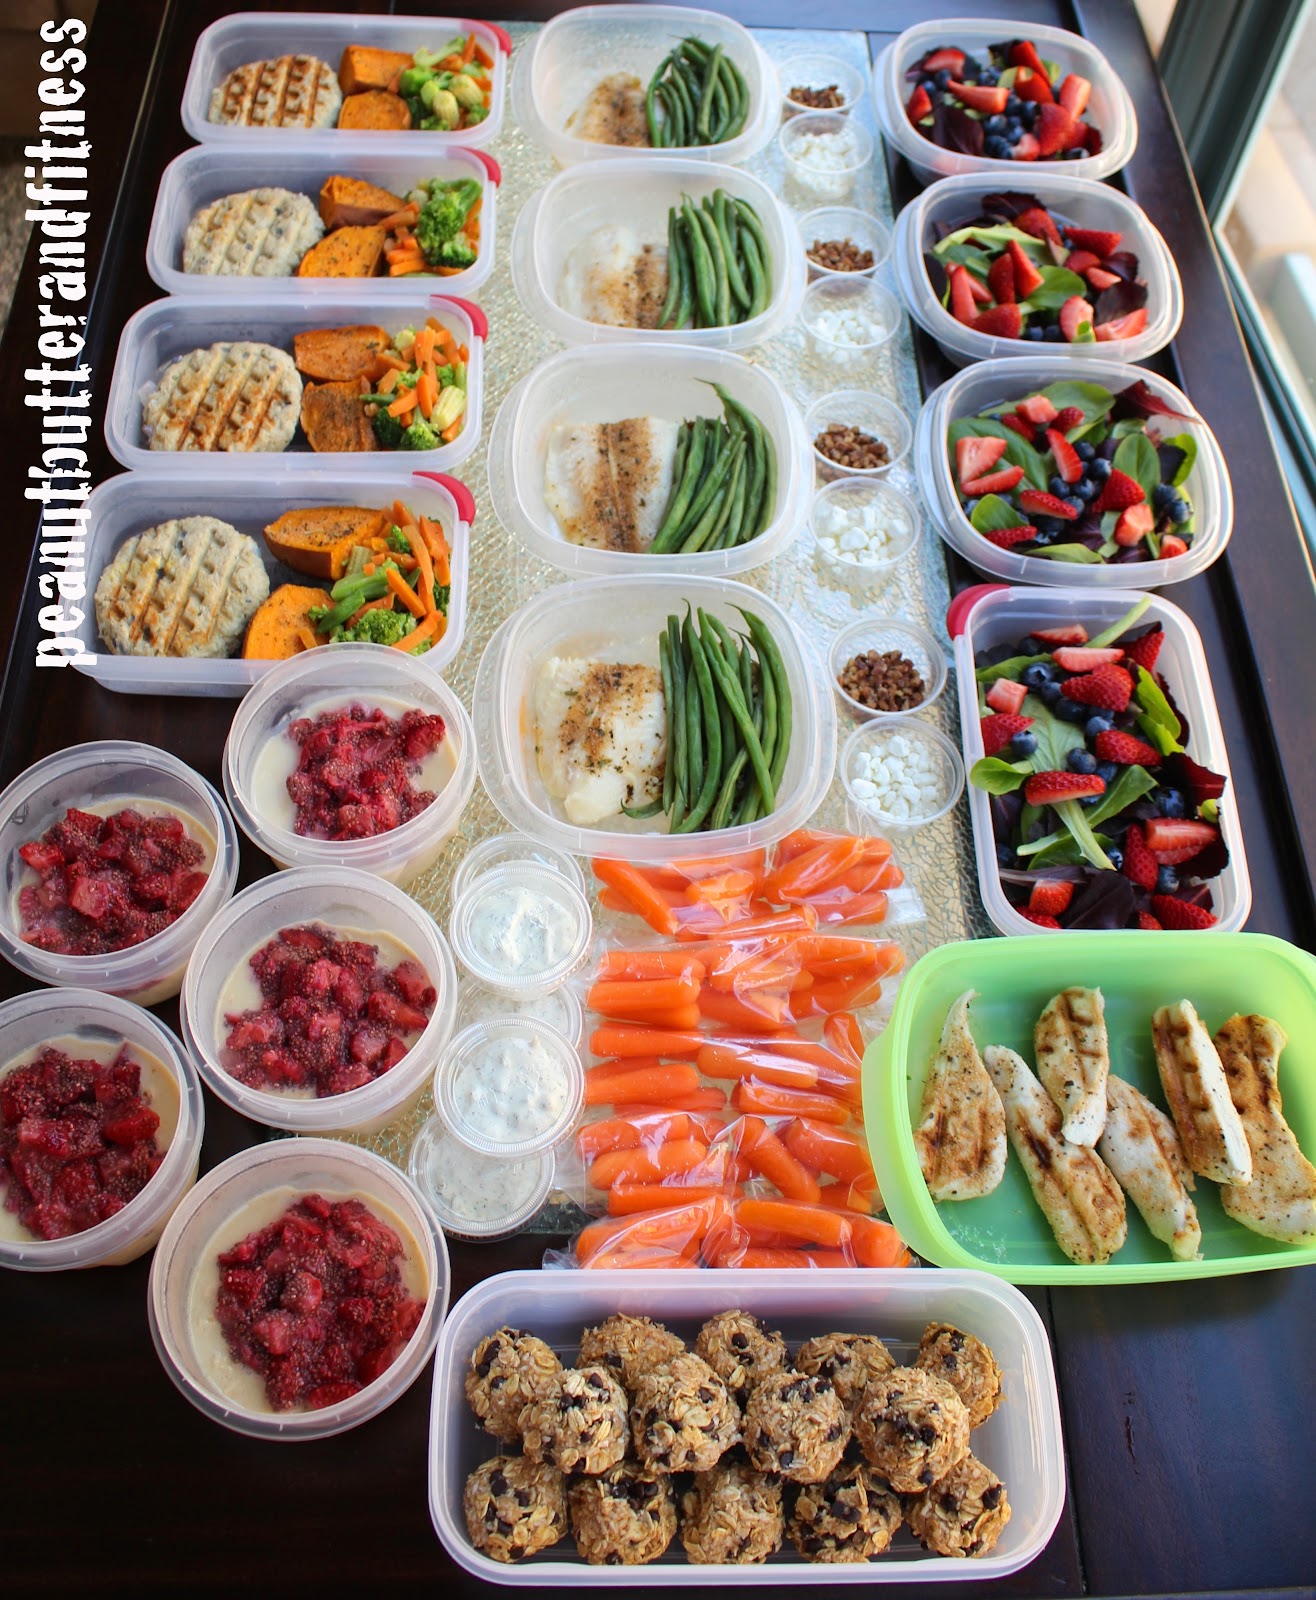 Meal Prep Ideas - Week of February 2nd - Peanut Butter and Fitness